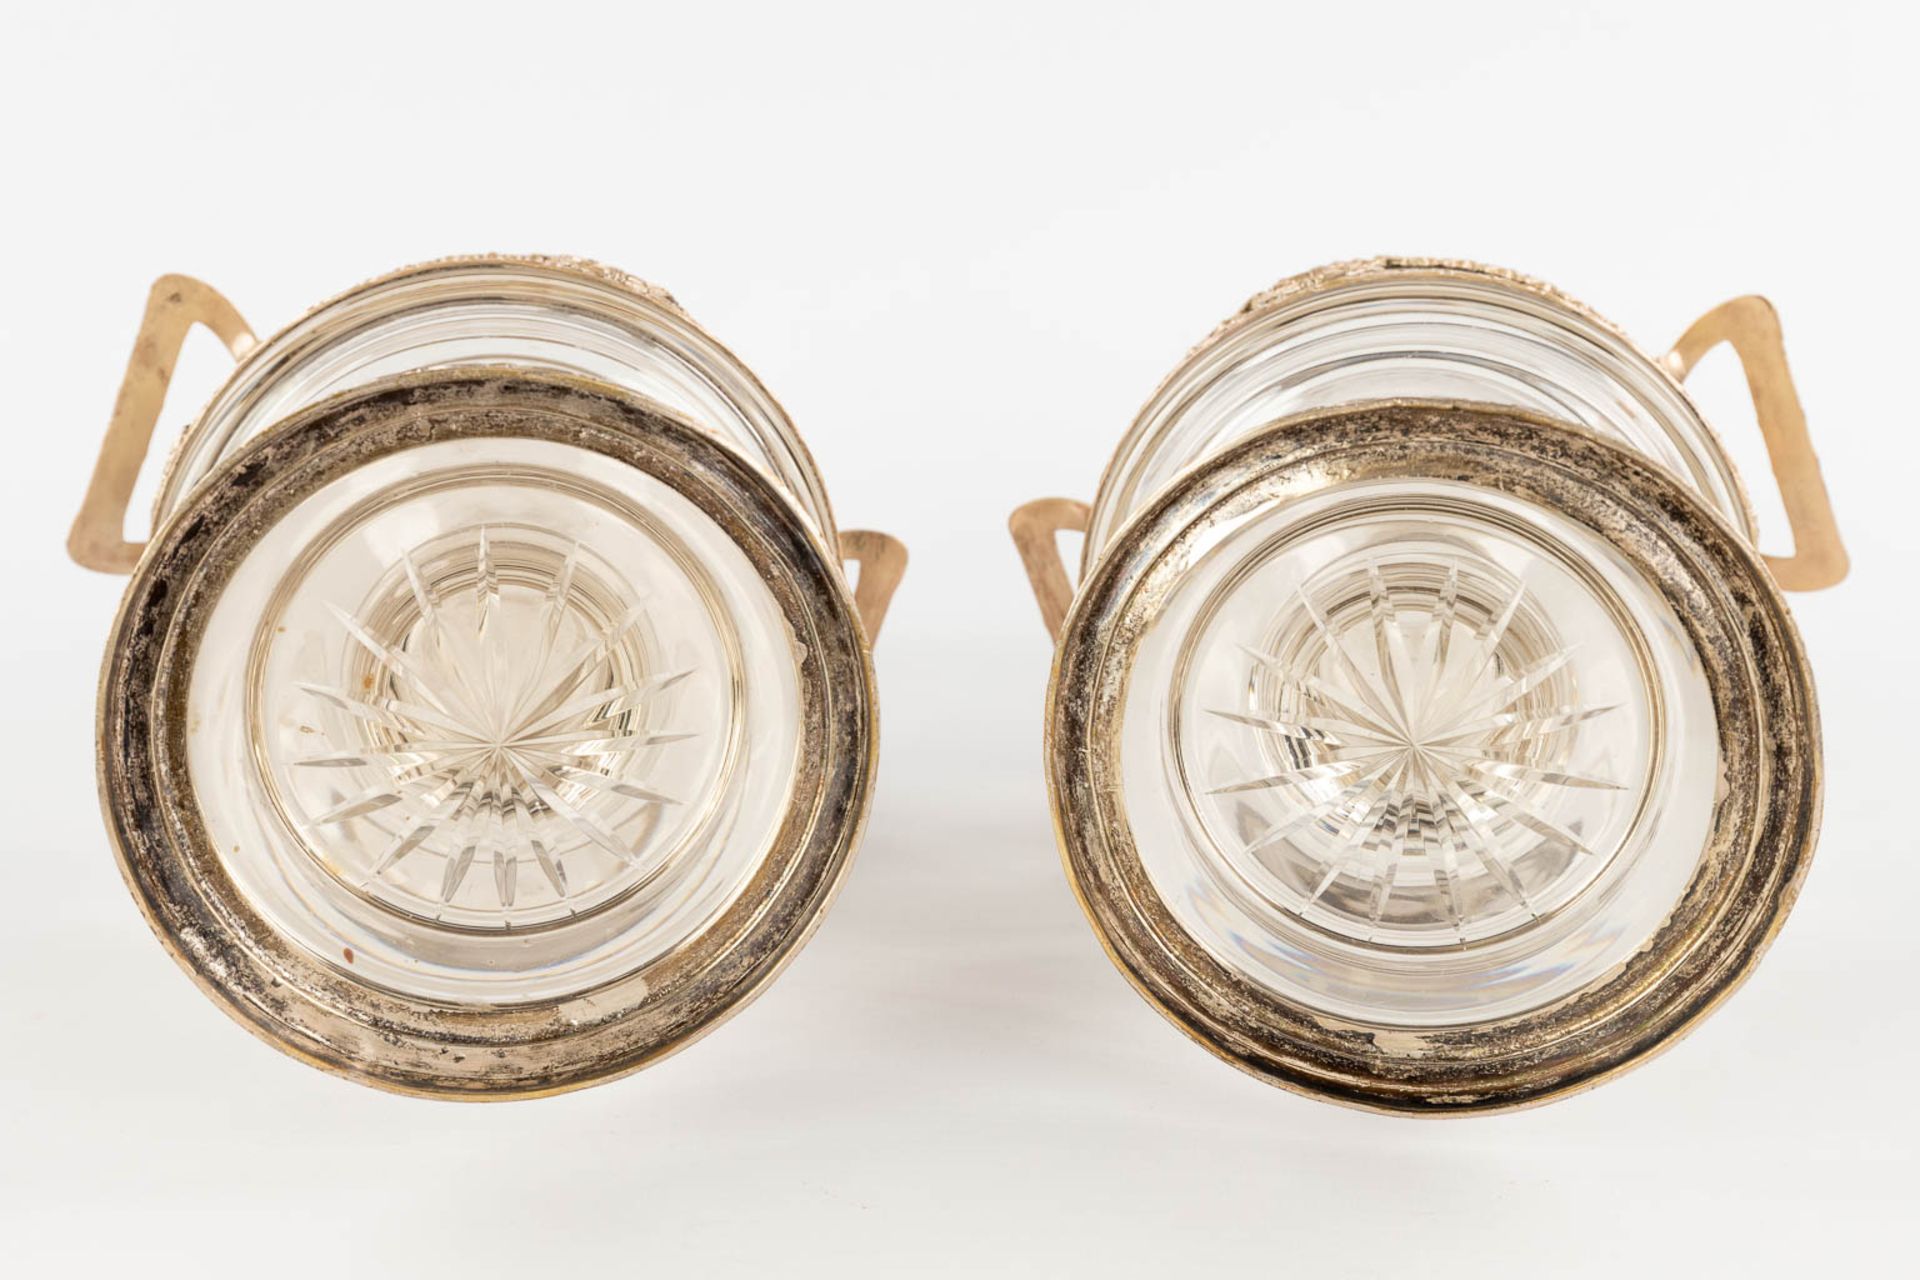 A pair of decorative vases, silver-plated bronze on glass, Neoclassical. 20th C. (D:14 x W:18 x H:33 - Bild 7 aus 16